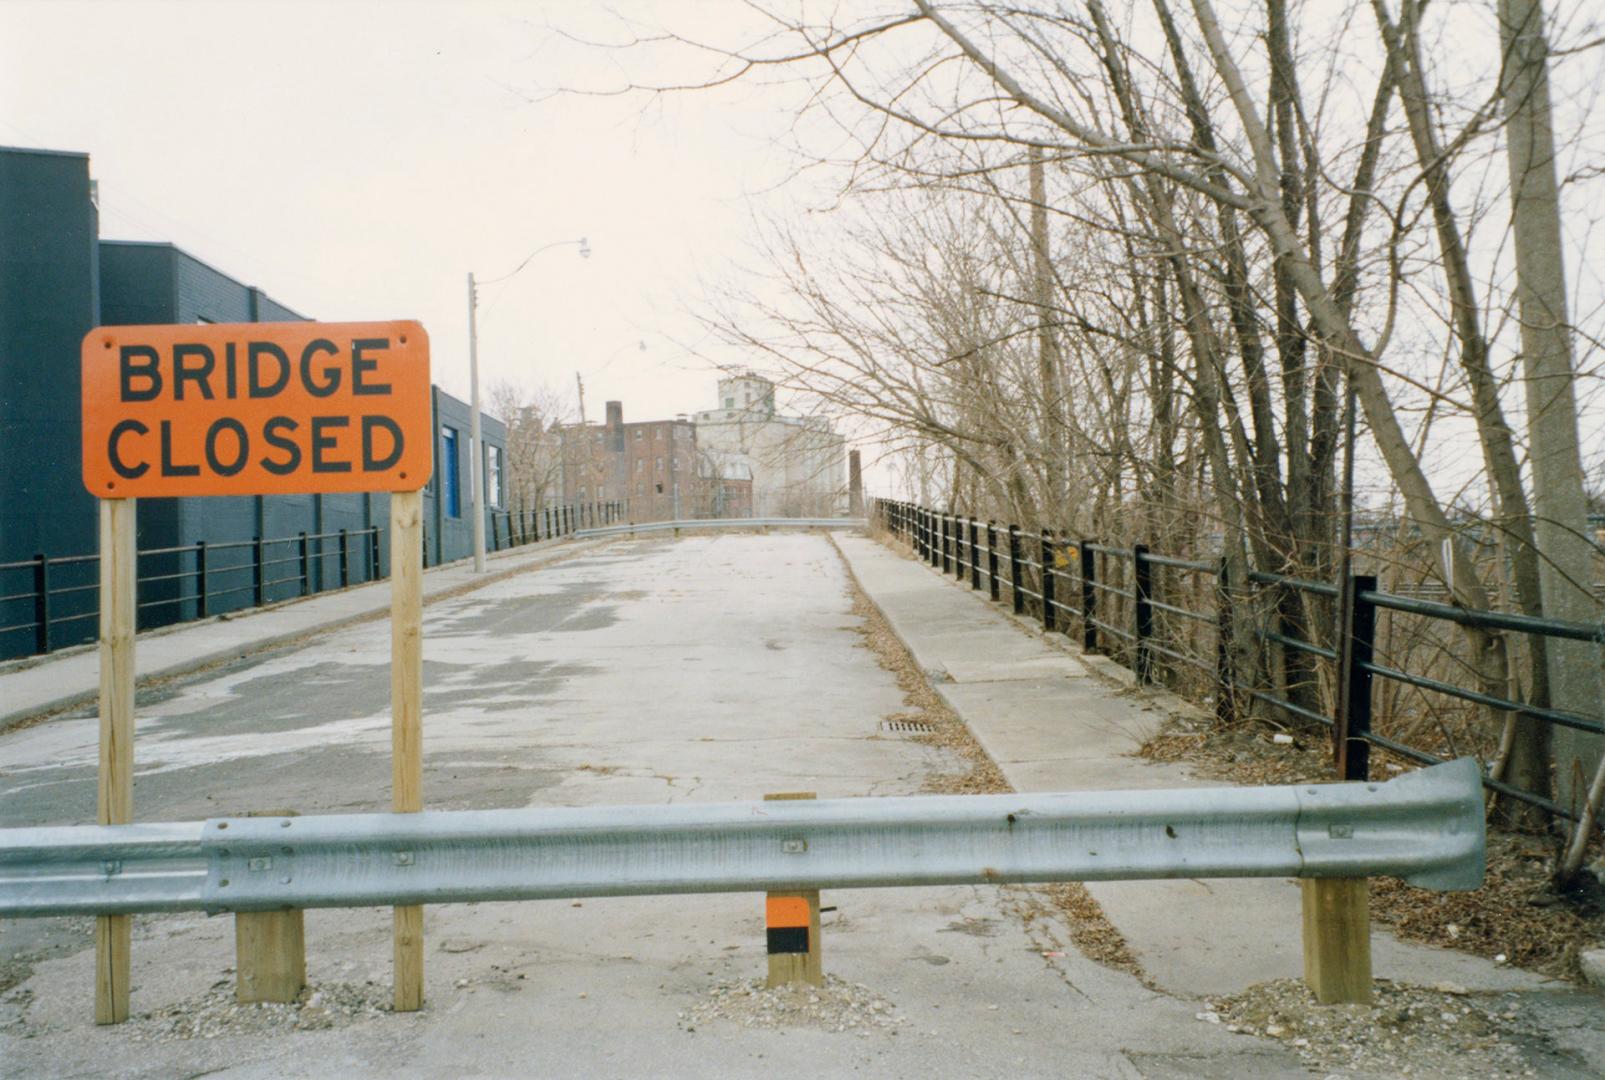 Weston Road Bridge, looking northwest from Hook Avenue to the old Campell Flour Mill, south of Junction Road, east of Cawthra Street.